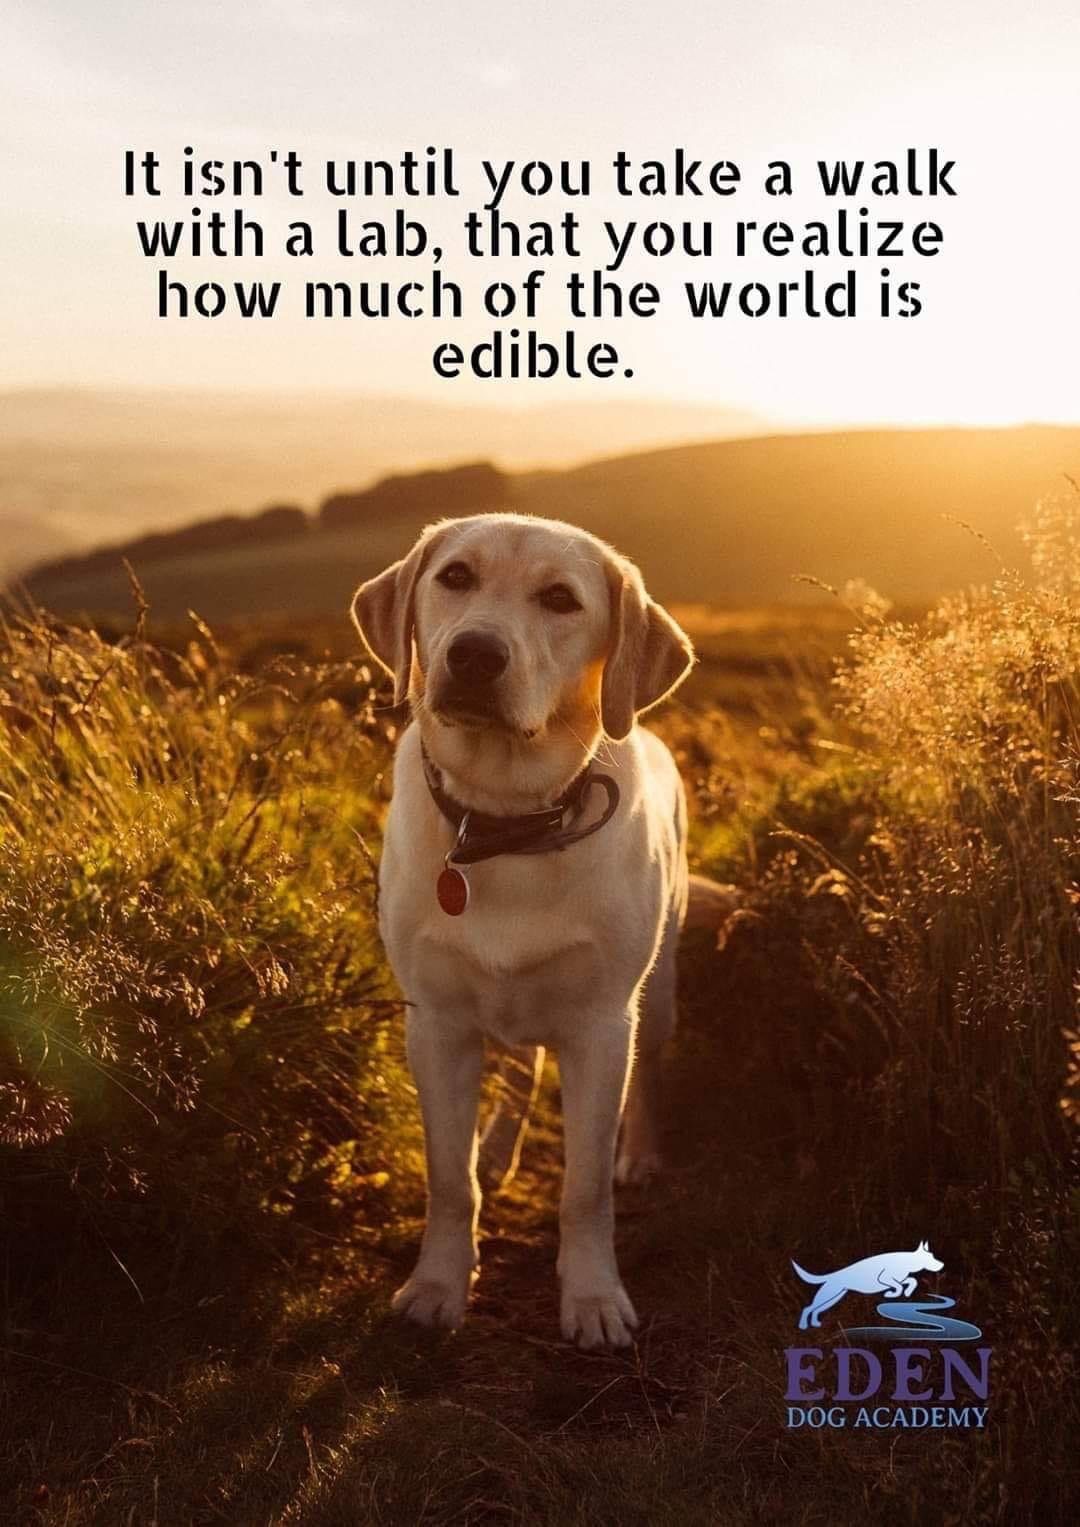 random photos and pics - labrador dog - It isn't until you take a walk with a lab, that you realize how much of the world is edible. Eden Dog Academy